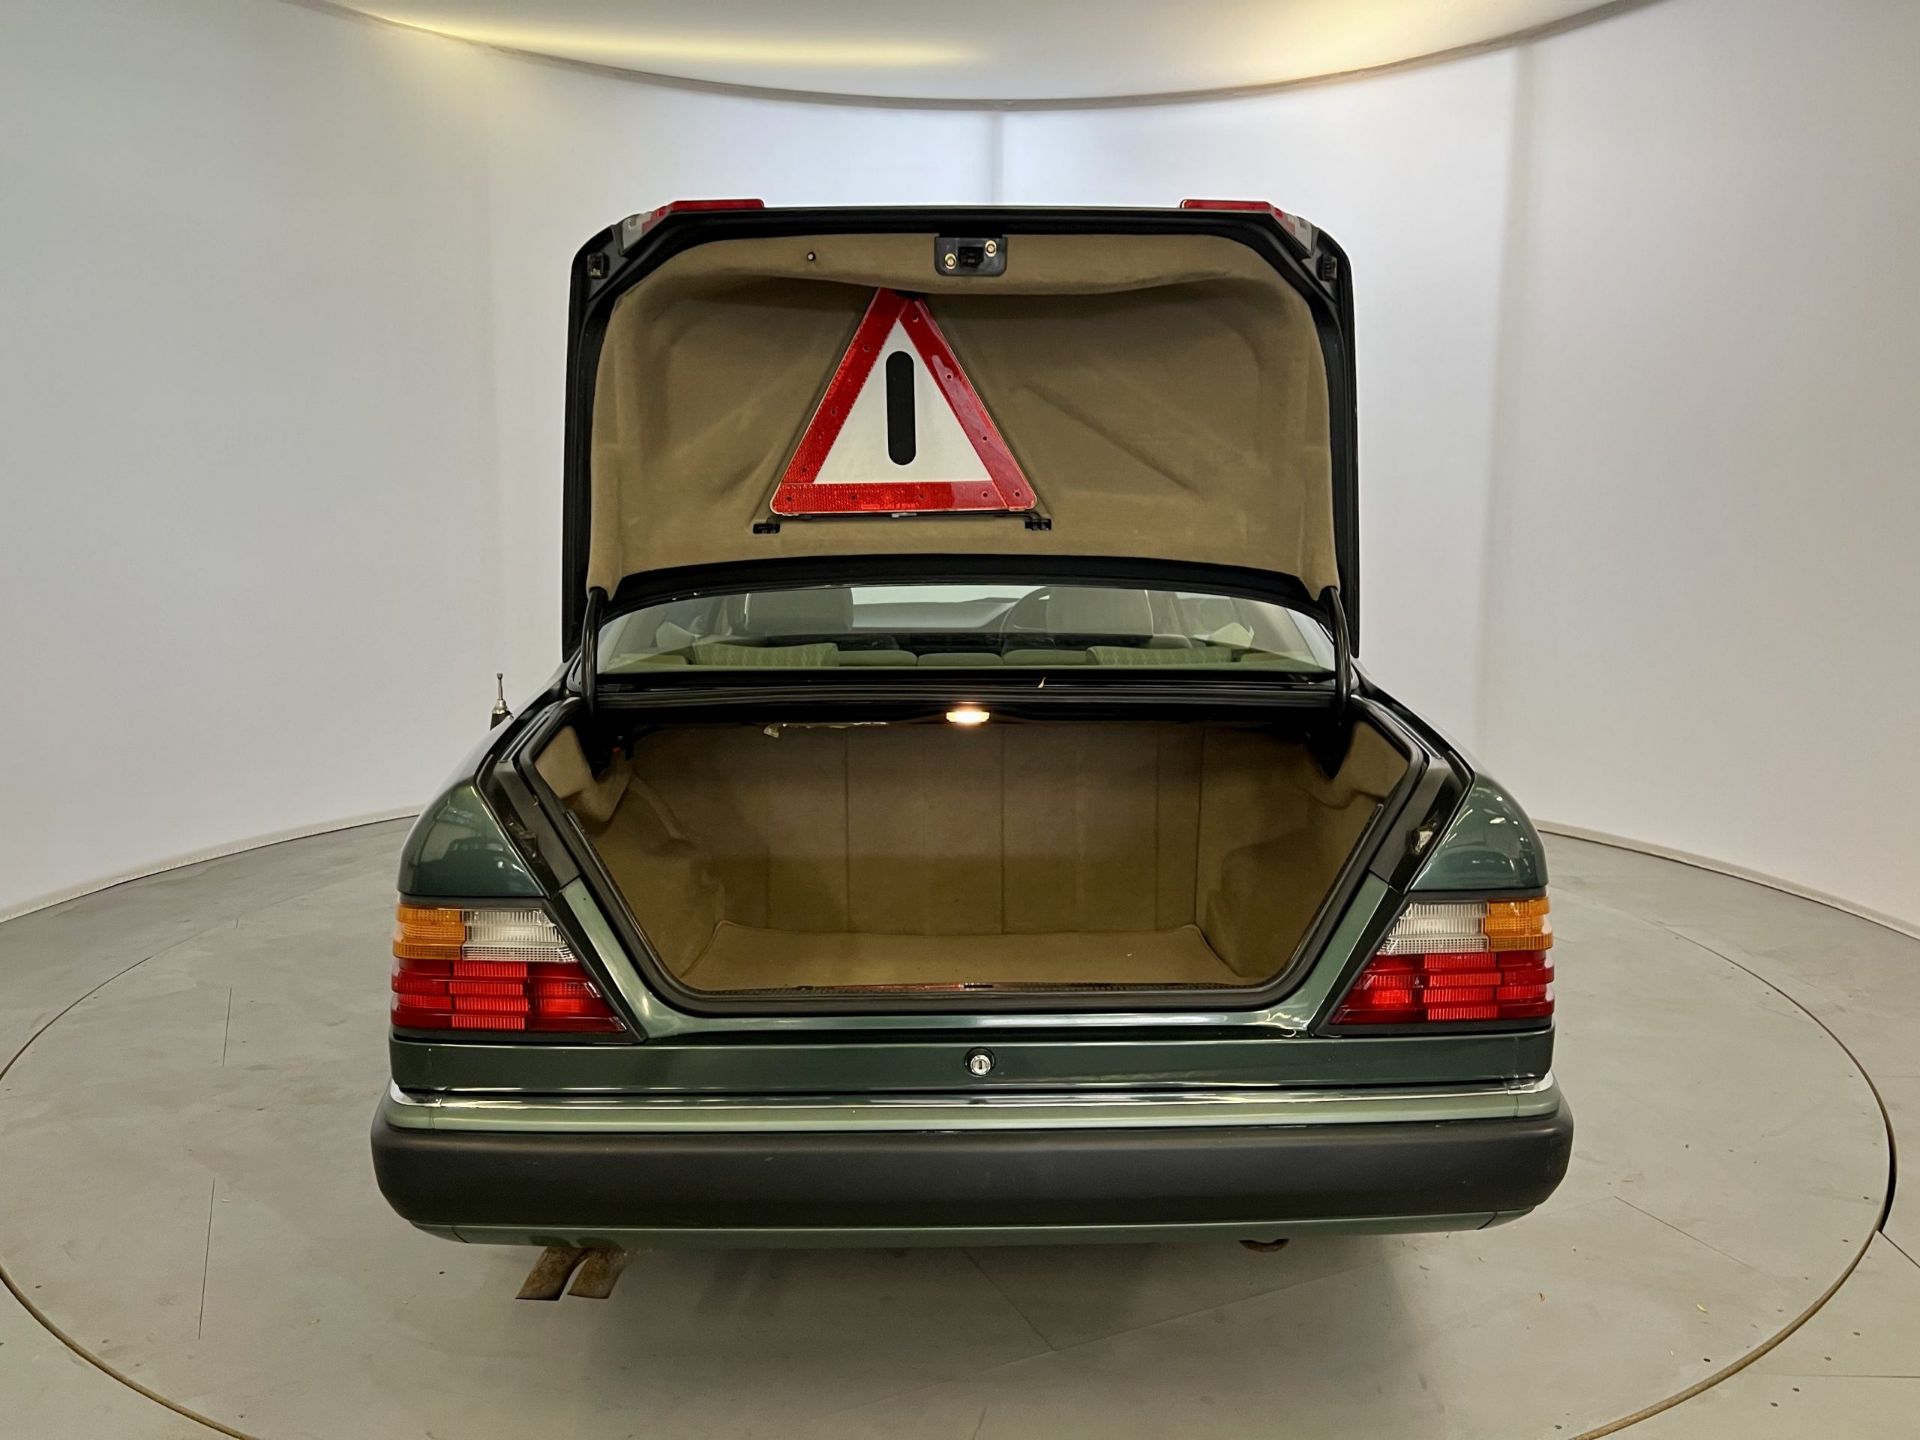 Mercedes 300CE - Image 27 of 30